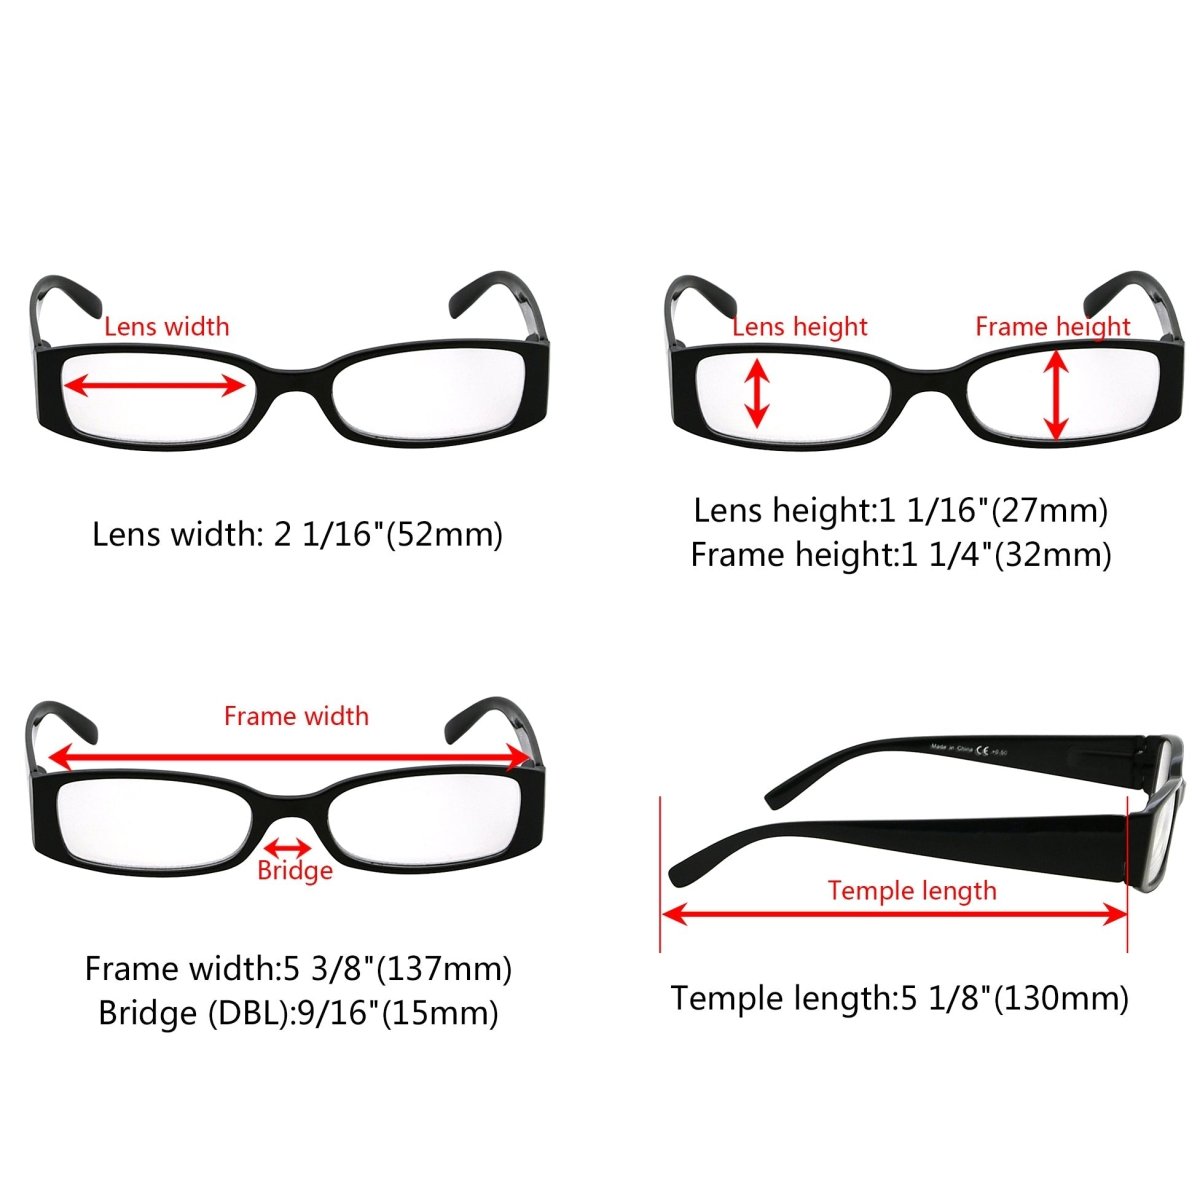 10 Pack Stylish Reading Glasses with Different Pattern Arm R040eyekeeper.com